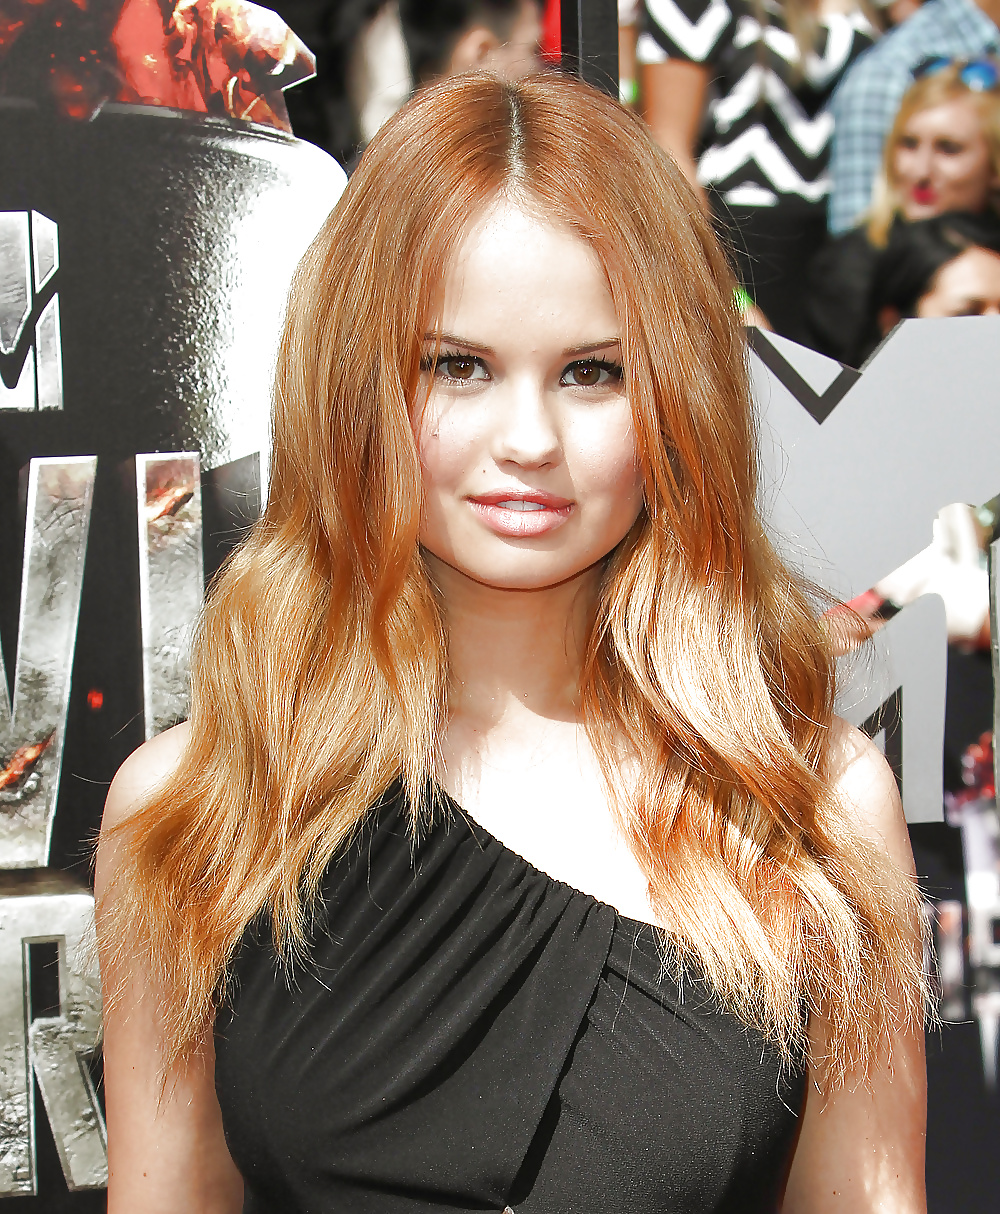 debby_Comment_what_you_would_do_to_her (12/20)